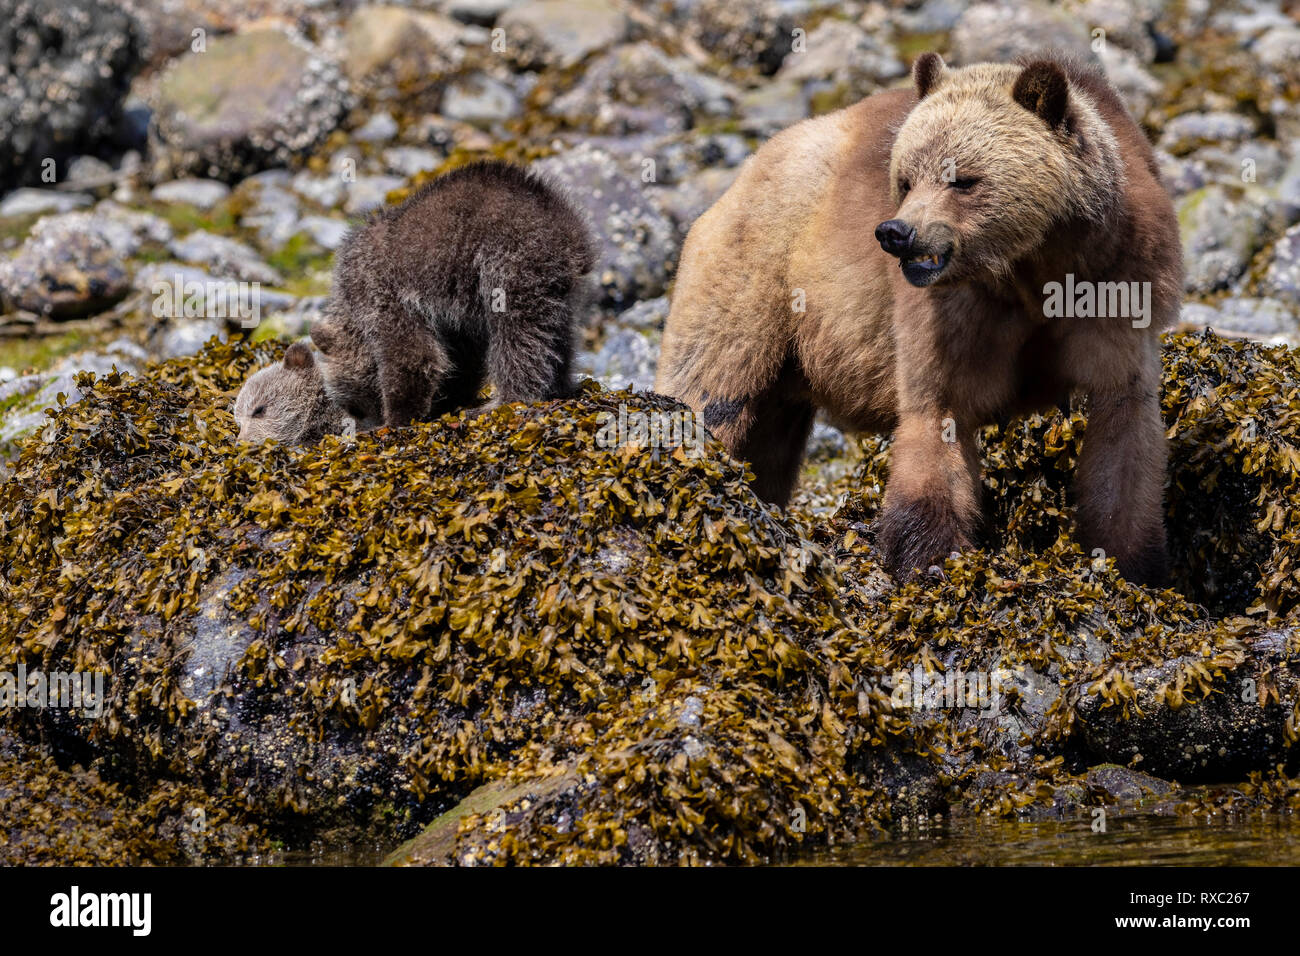 Grizzly bear (Ursus arctos horribilis) sow with two cubs feasting along the shoreline at low tide in Glendale Cove, Knight Inlet, First Nations Territory, British Columbia, Canada. Stock Photo